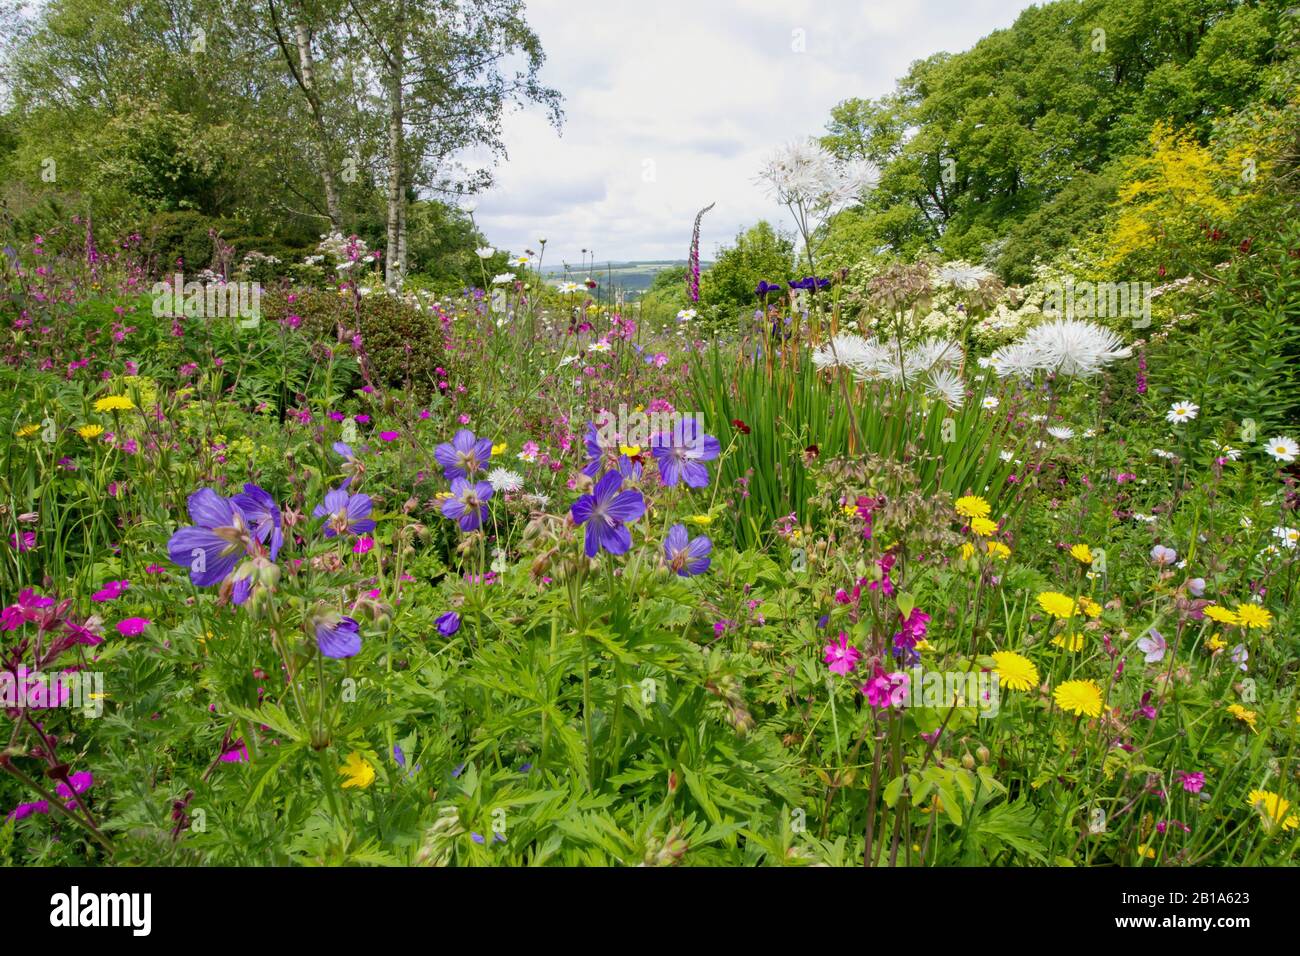 Garden House; Buckland Monochorum; the colourful Wildflower Meadow in the summertime Stock Photo